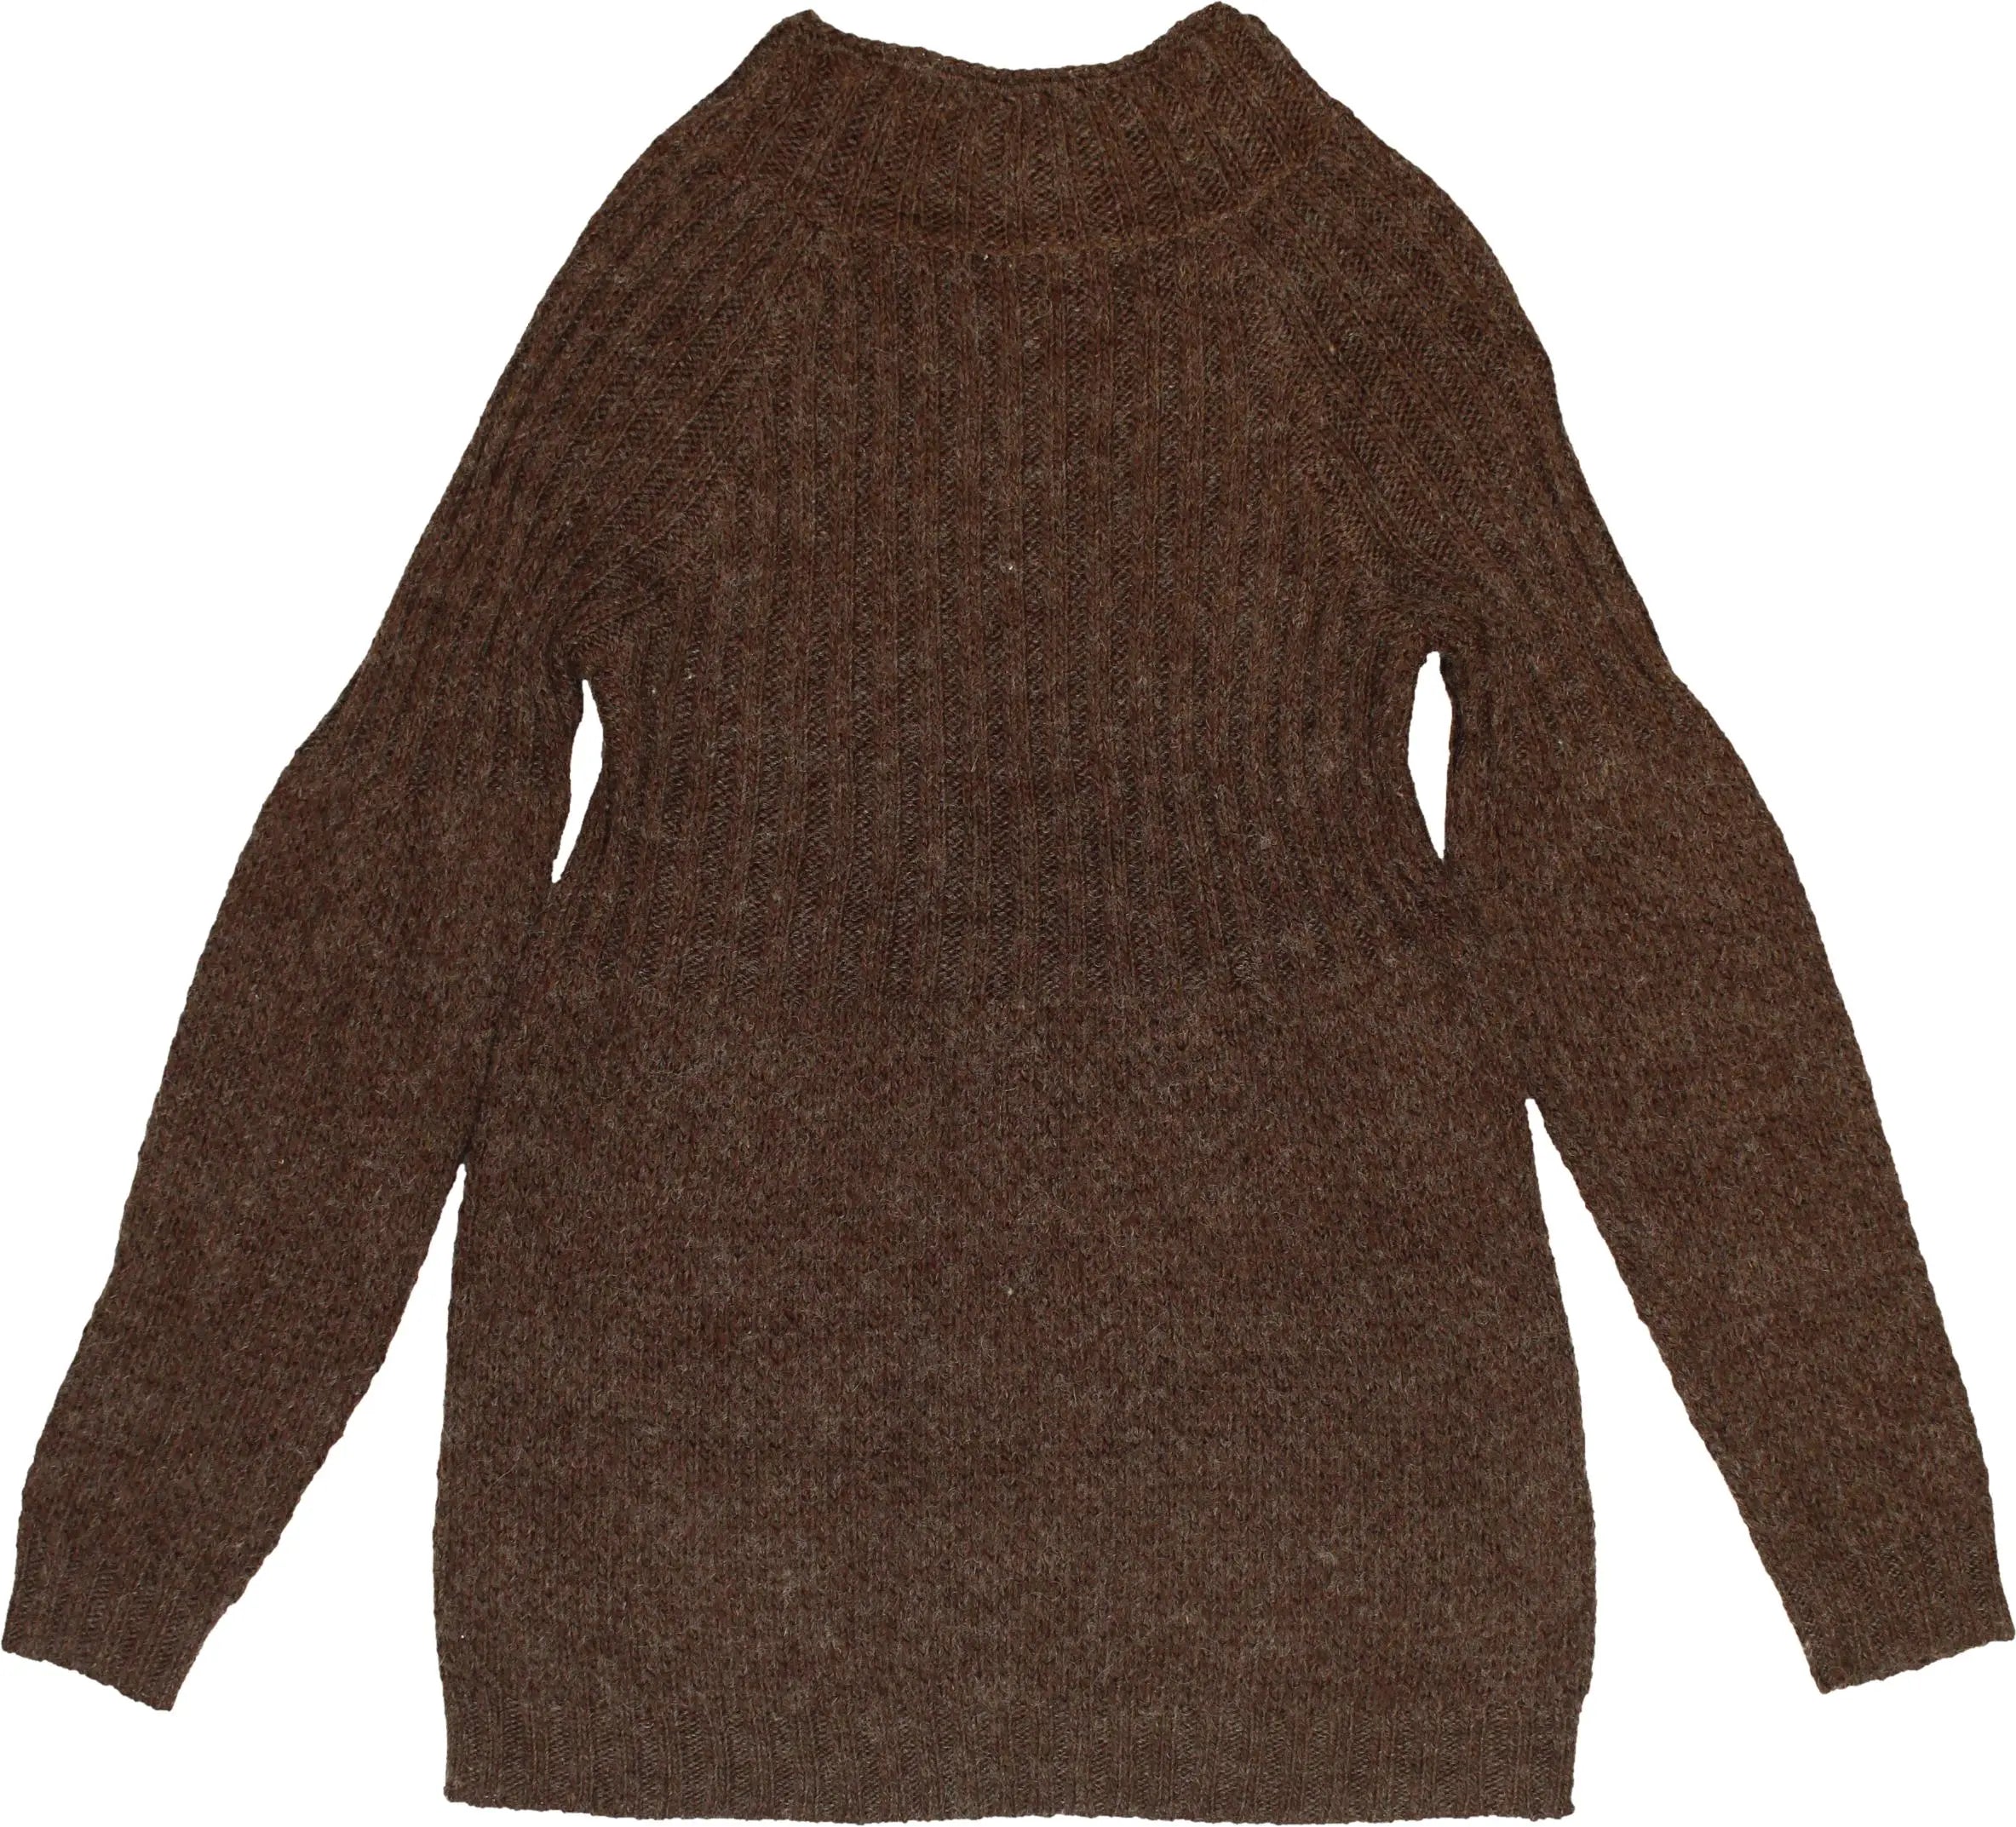 C&A - Brown Jumper- ThriftTale.com - Vintage and second handclothing